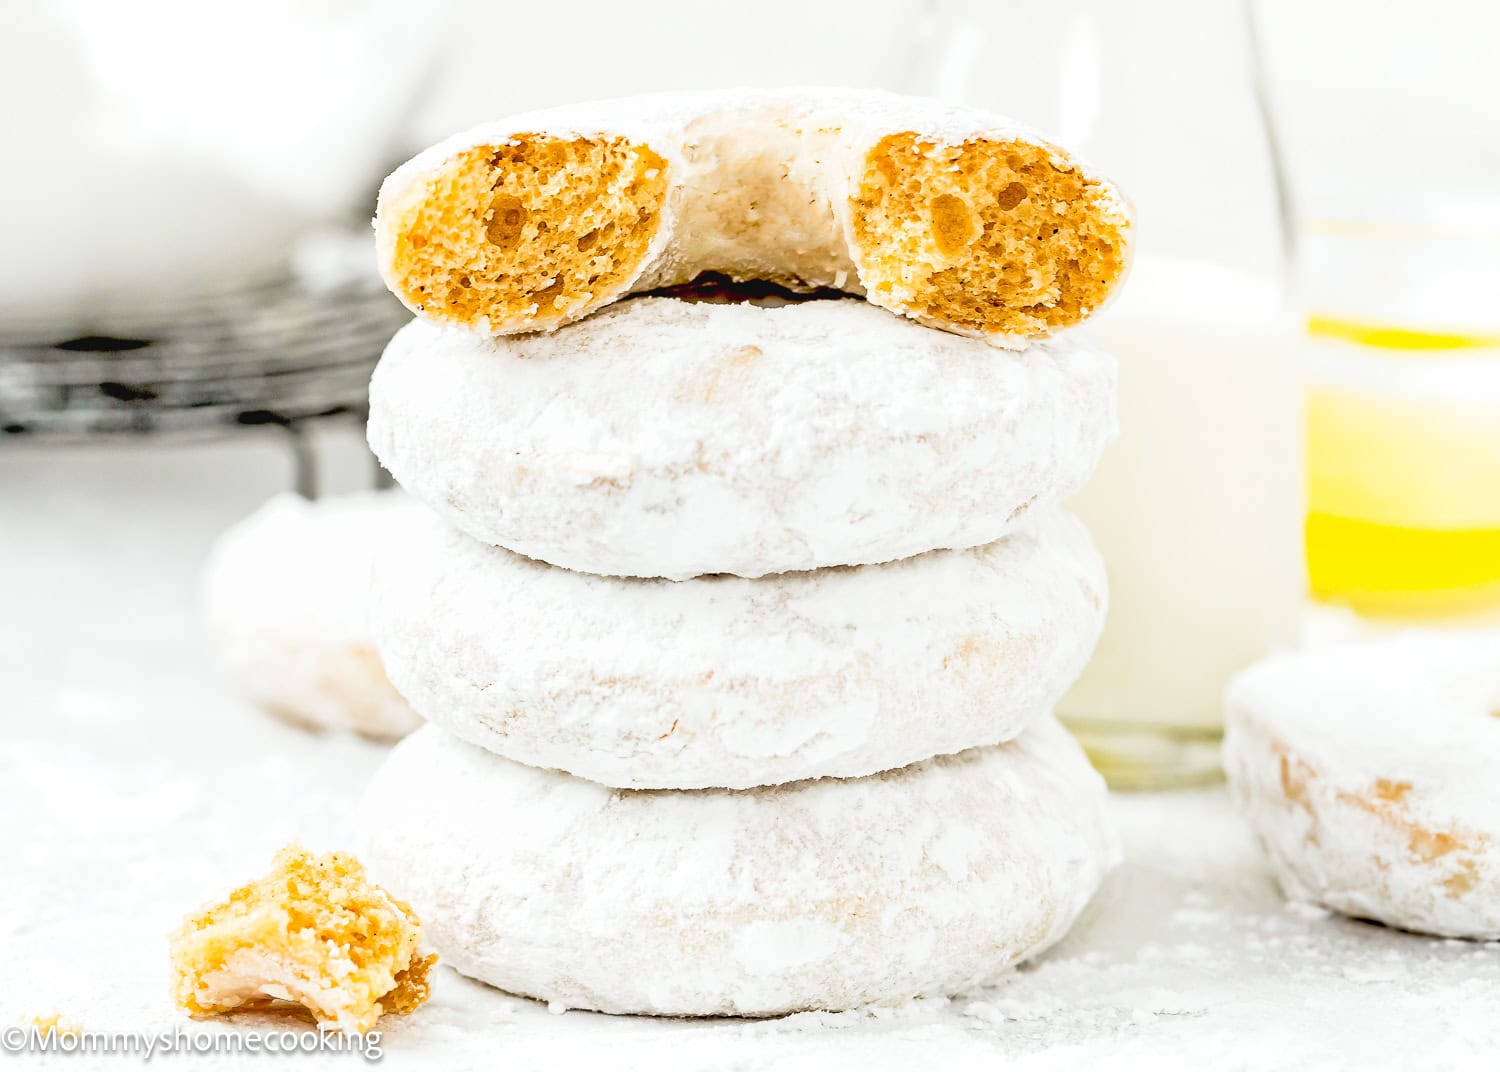 stack of four Eggless Old Fashioned Powdered Sugar Donuts showing its inside texture.